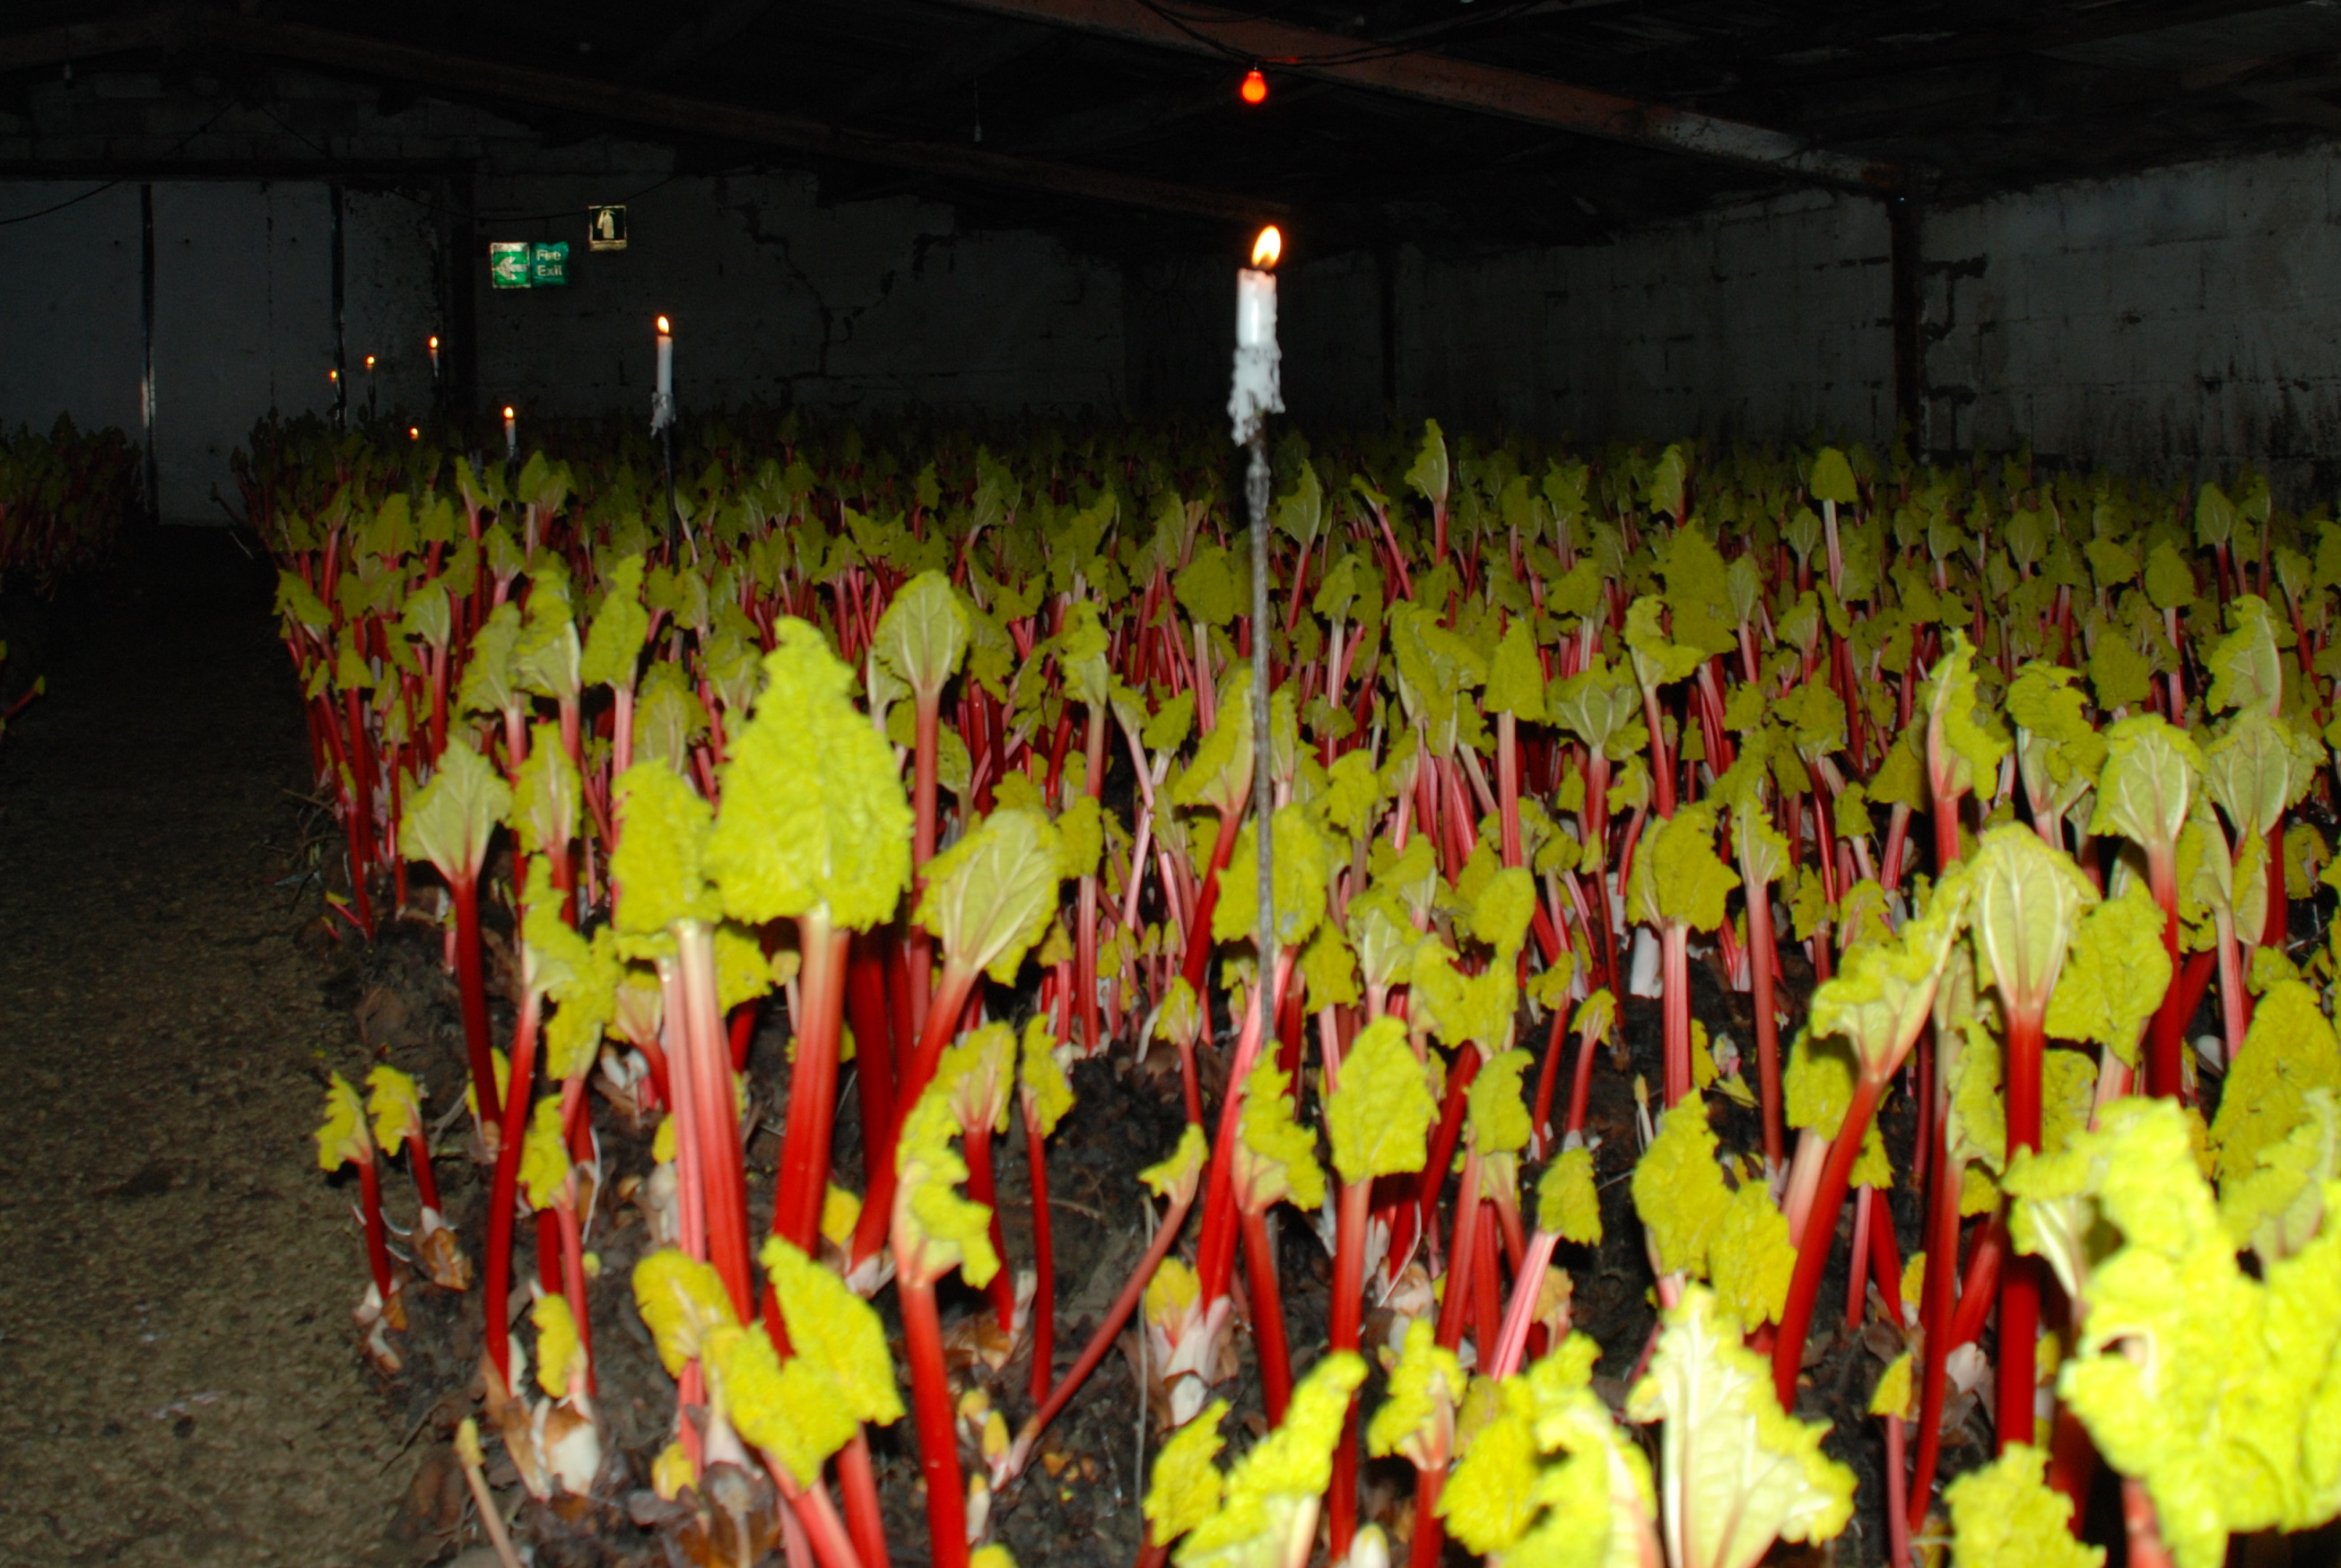 Candlelight in the rhubarb forcing shed